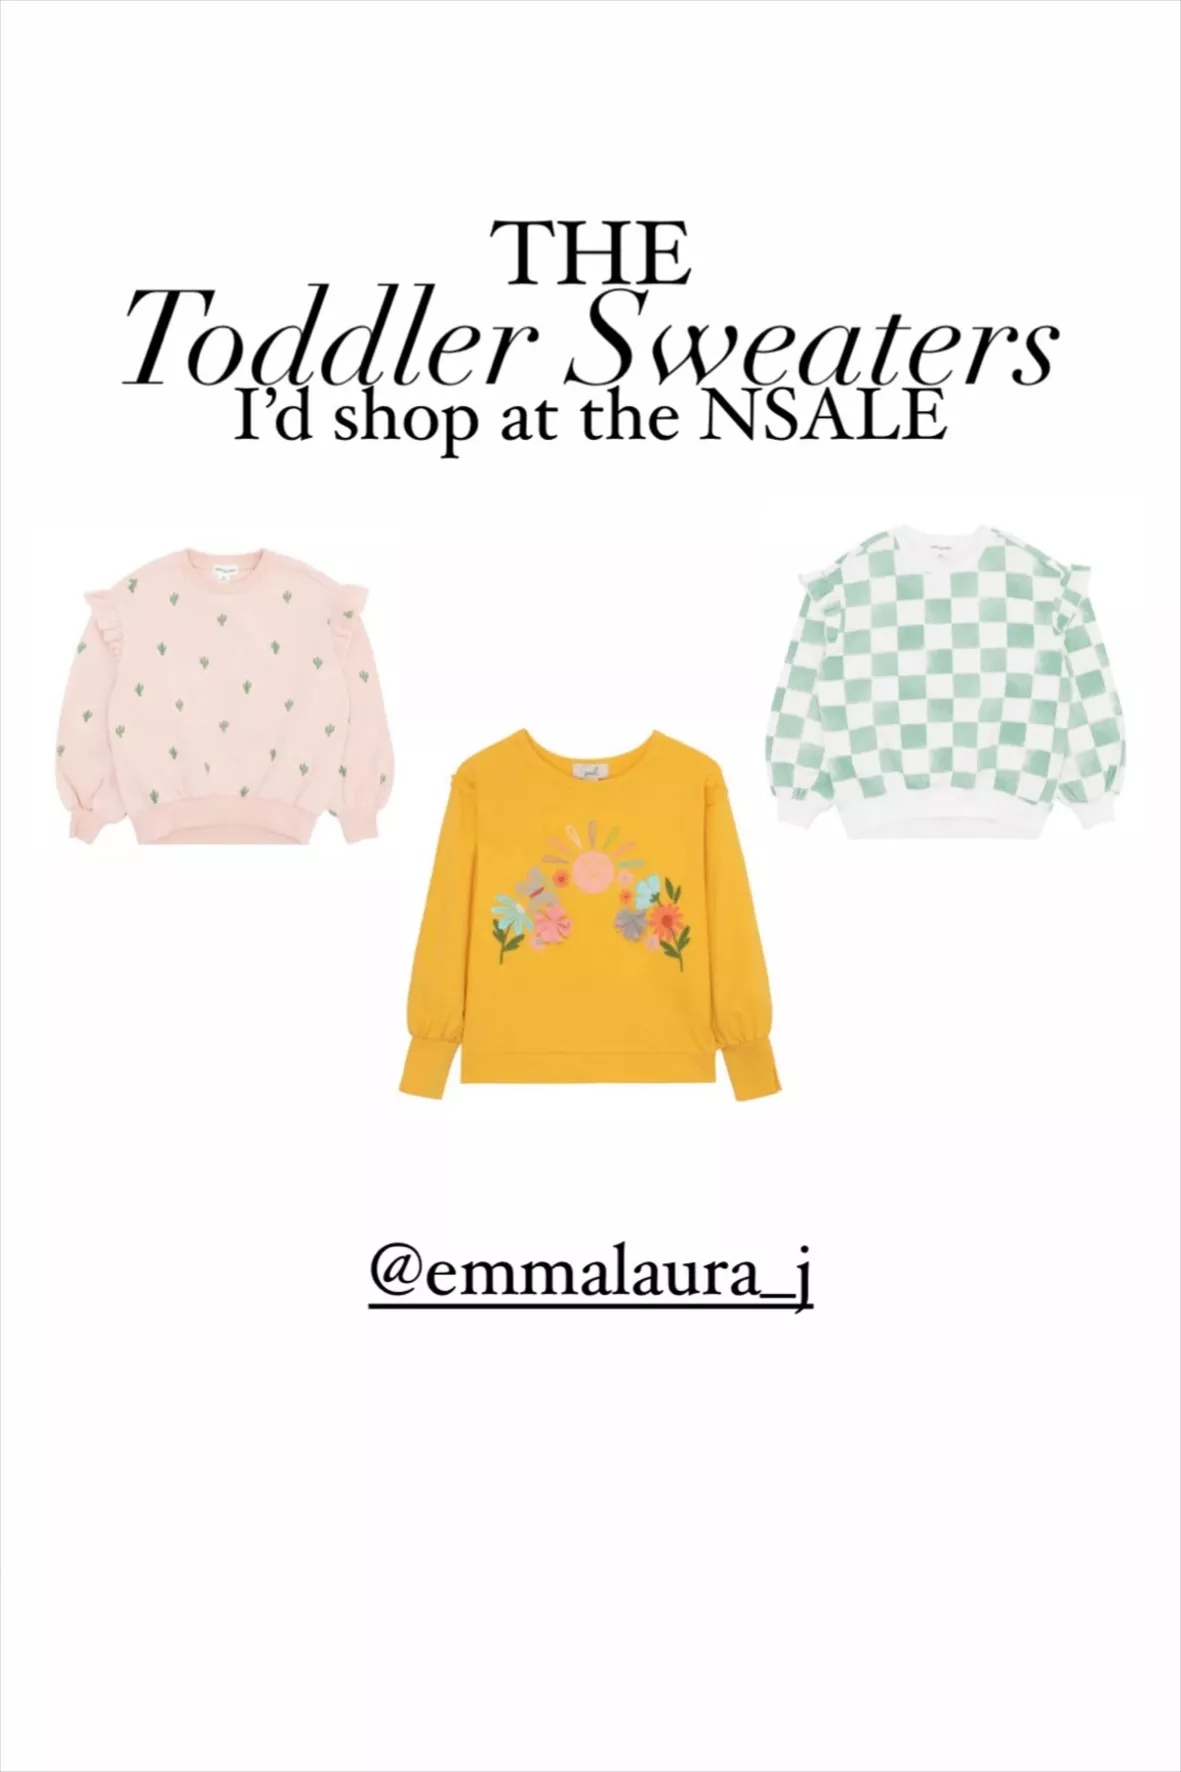 toddler chanel outfits